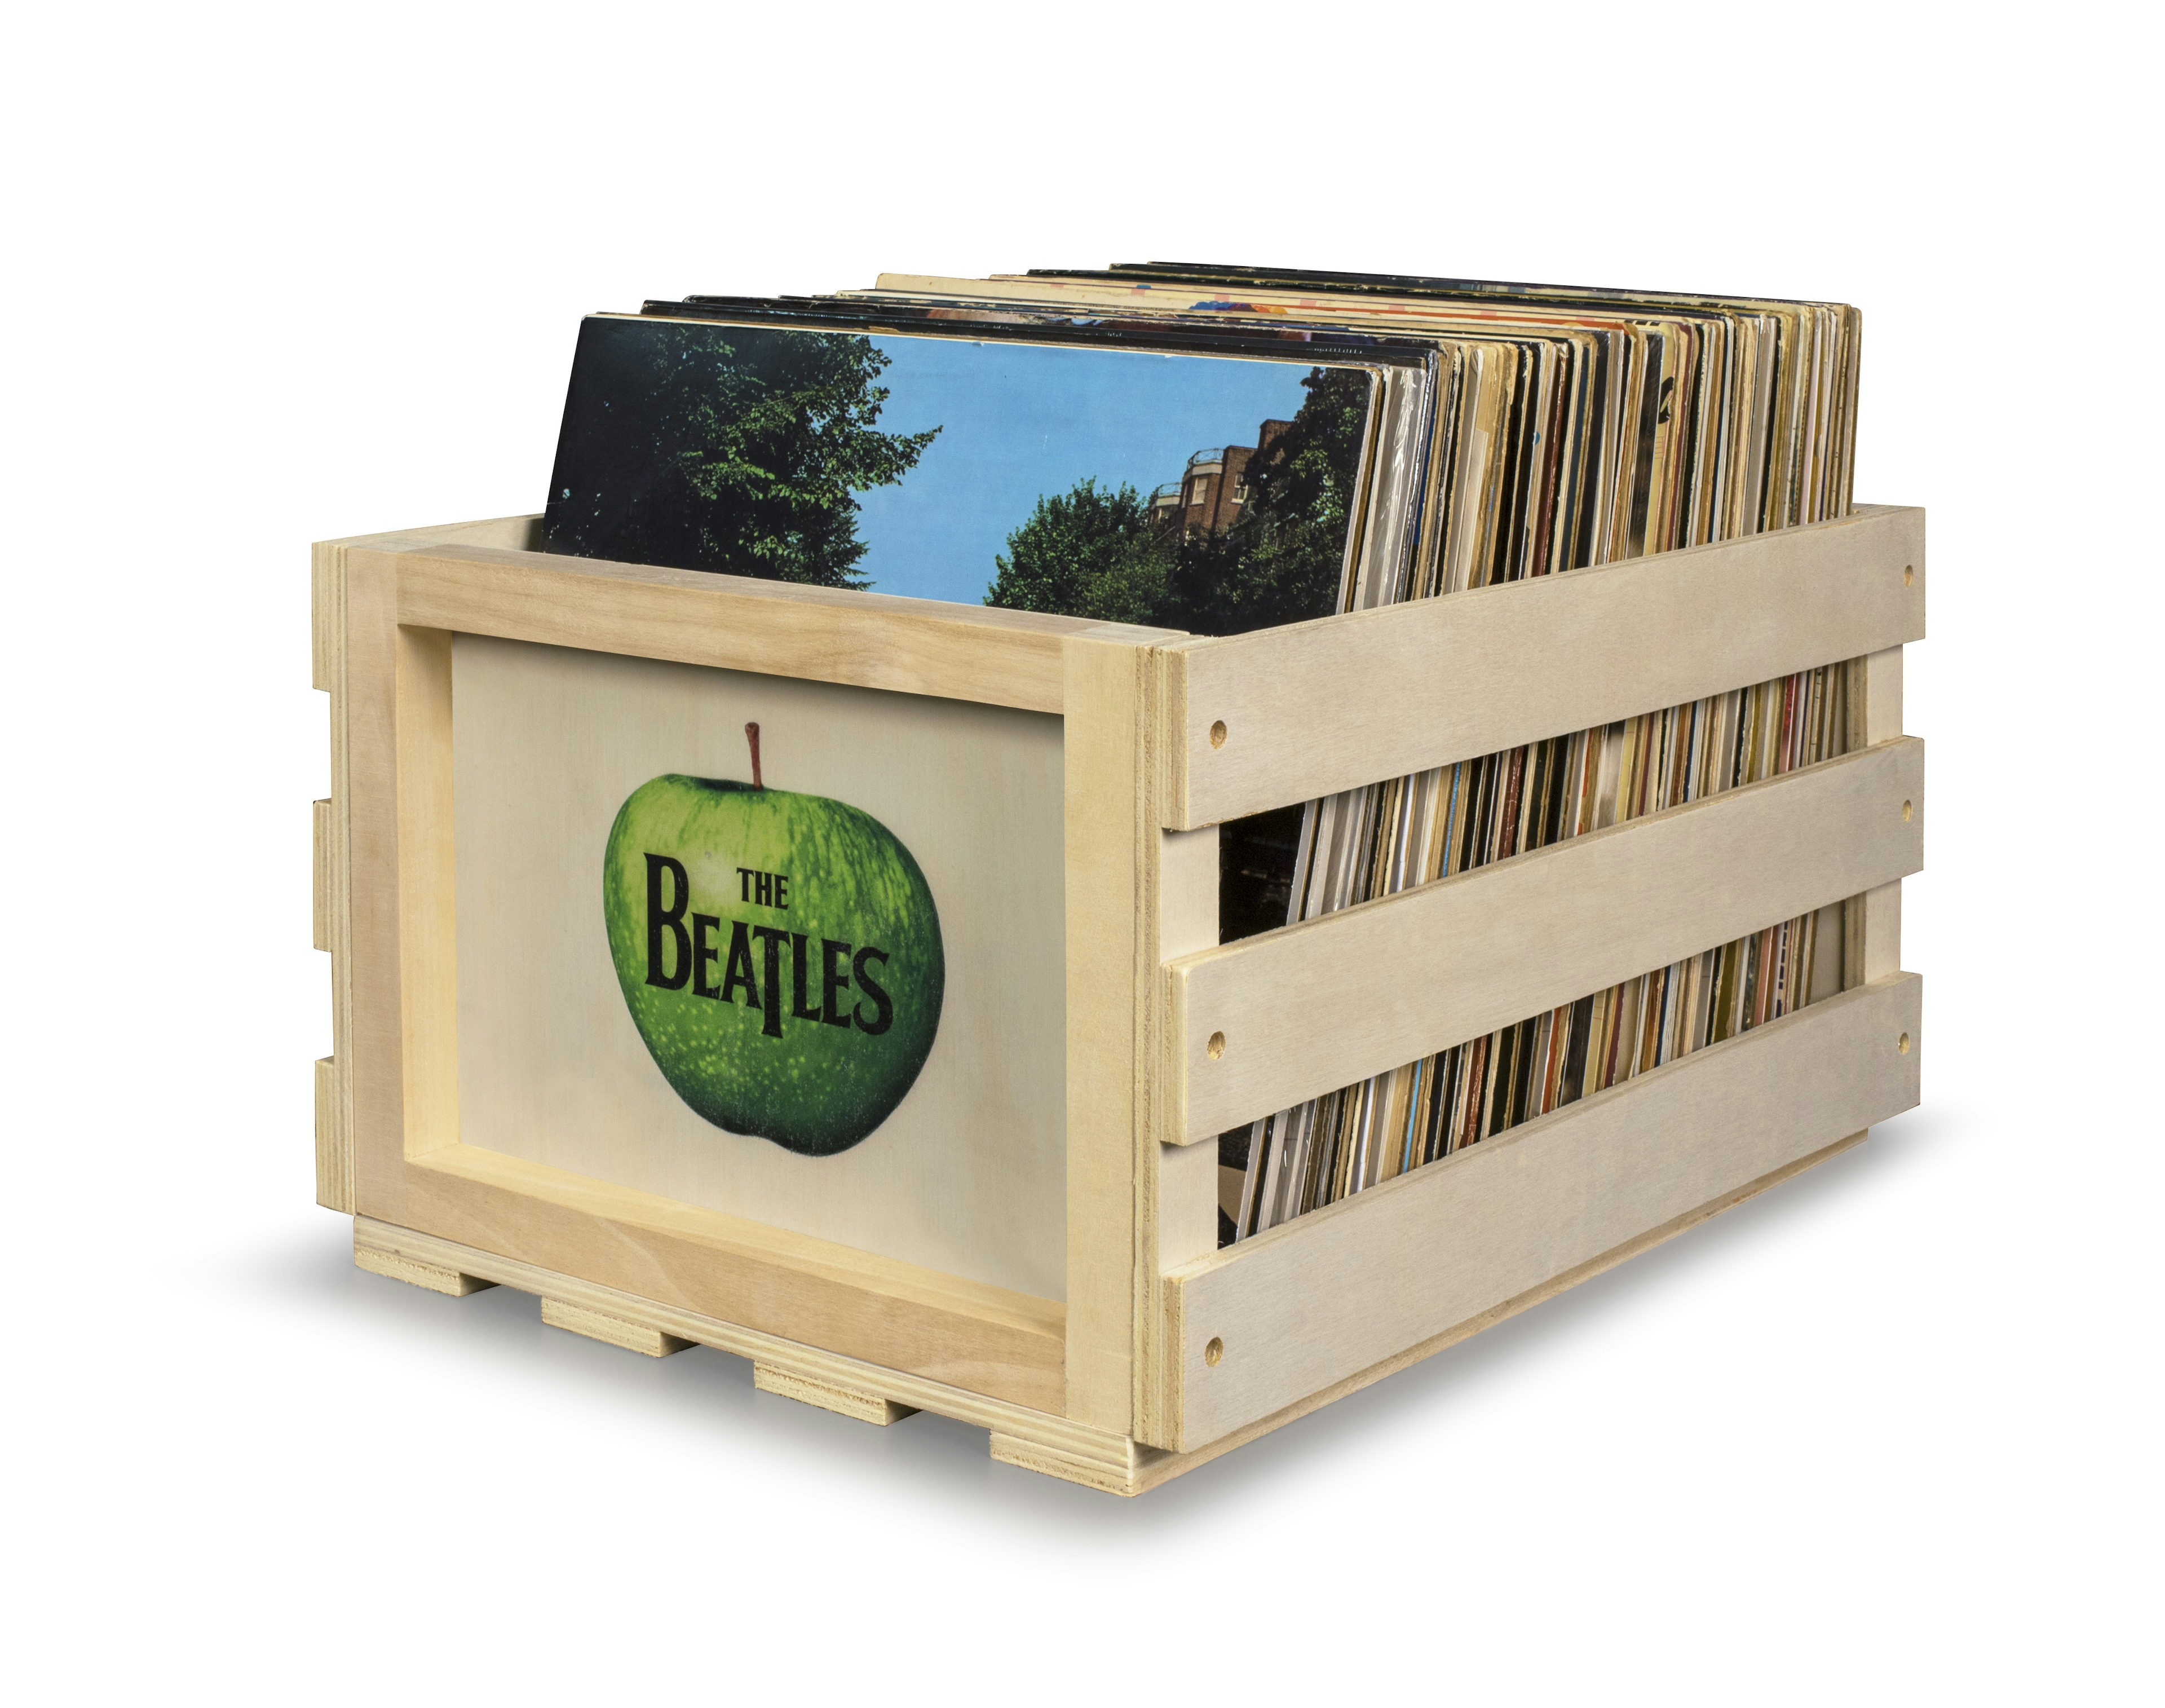 Album artwork for Album artwork for The Beatles Apple Vinyl Storage Crate by The Beatles by The Beatles Apple Vinyl Storage Crate - The Beatles